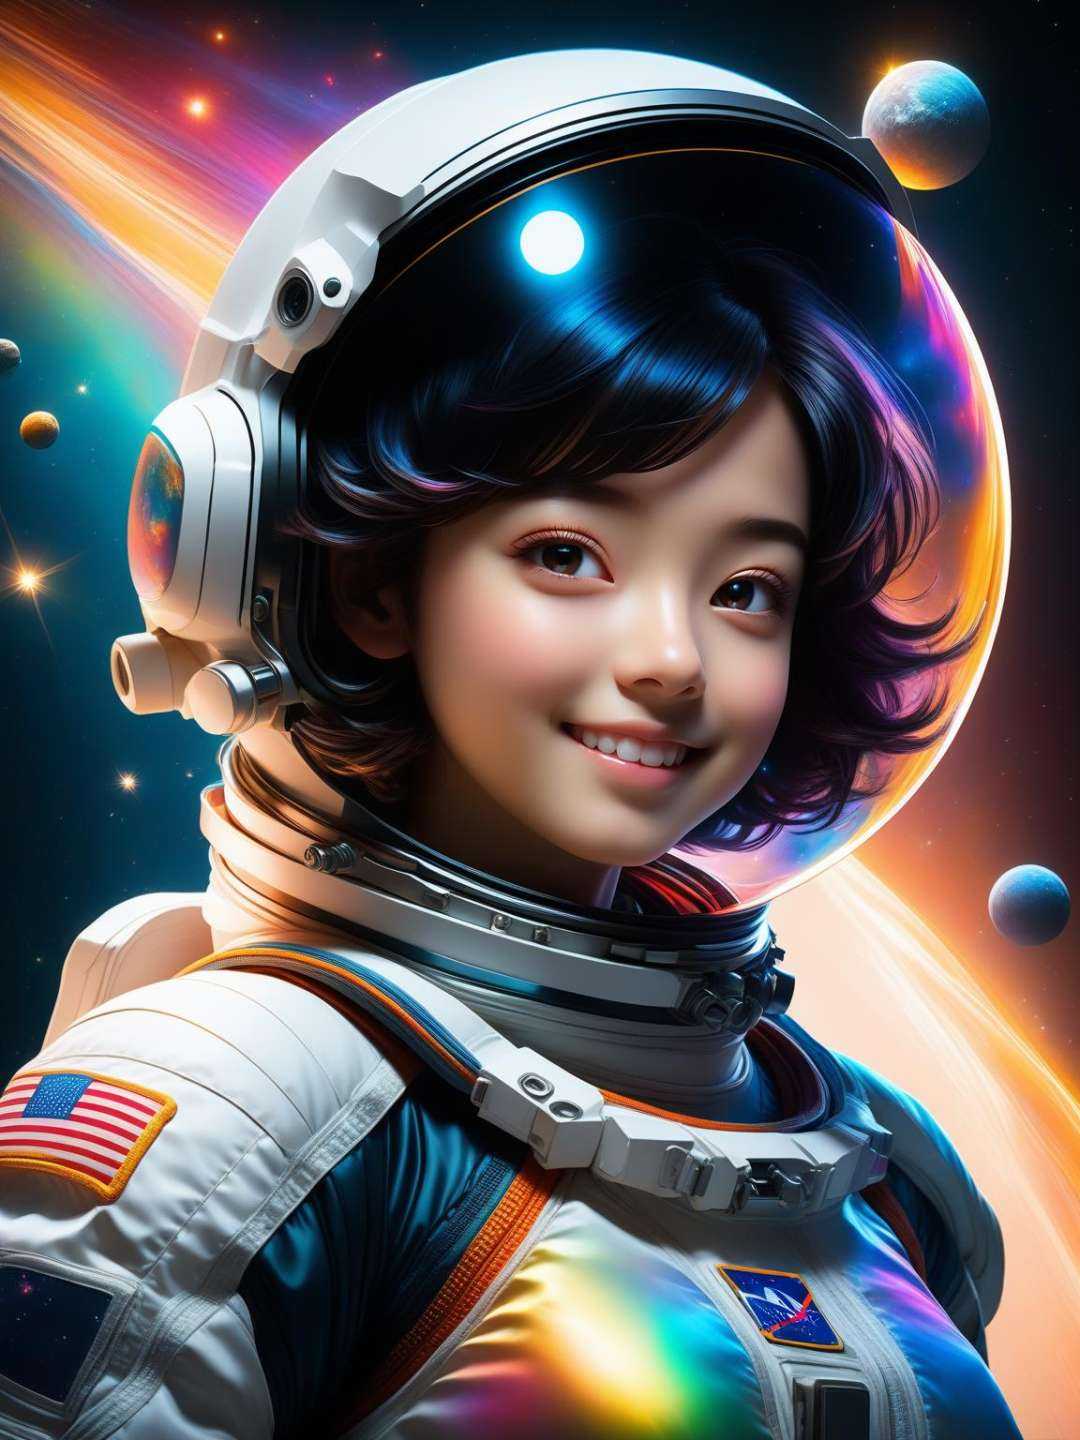 masterpiece, best quality, Half body portrait, 1girl, anime, 3D, realistic, **** girl, smiling, cute face, short hair, astronaut helmet, starry universe background, true light, bodysuit, beautiful, sexy, colourful, nsfw, smooth skin, illustration, by stanley artgerm lau, sideways glance, foreshortening, extremely detailed, high resolution, ultra quality, glare, Iridescent, Global illumination, realistic light and shadow, hd, 8k, 